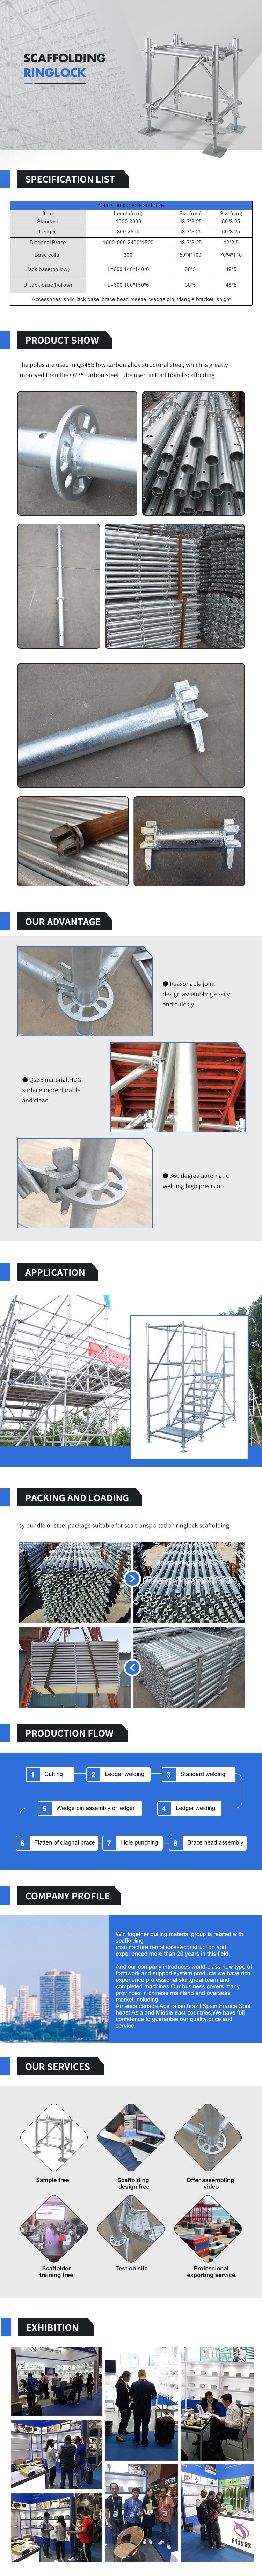 Modular Tubular Accessories Ringlock System Scaffold for Construction